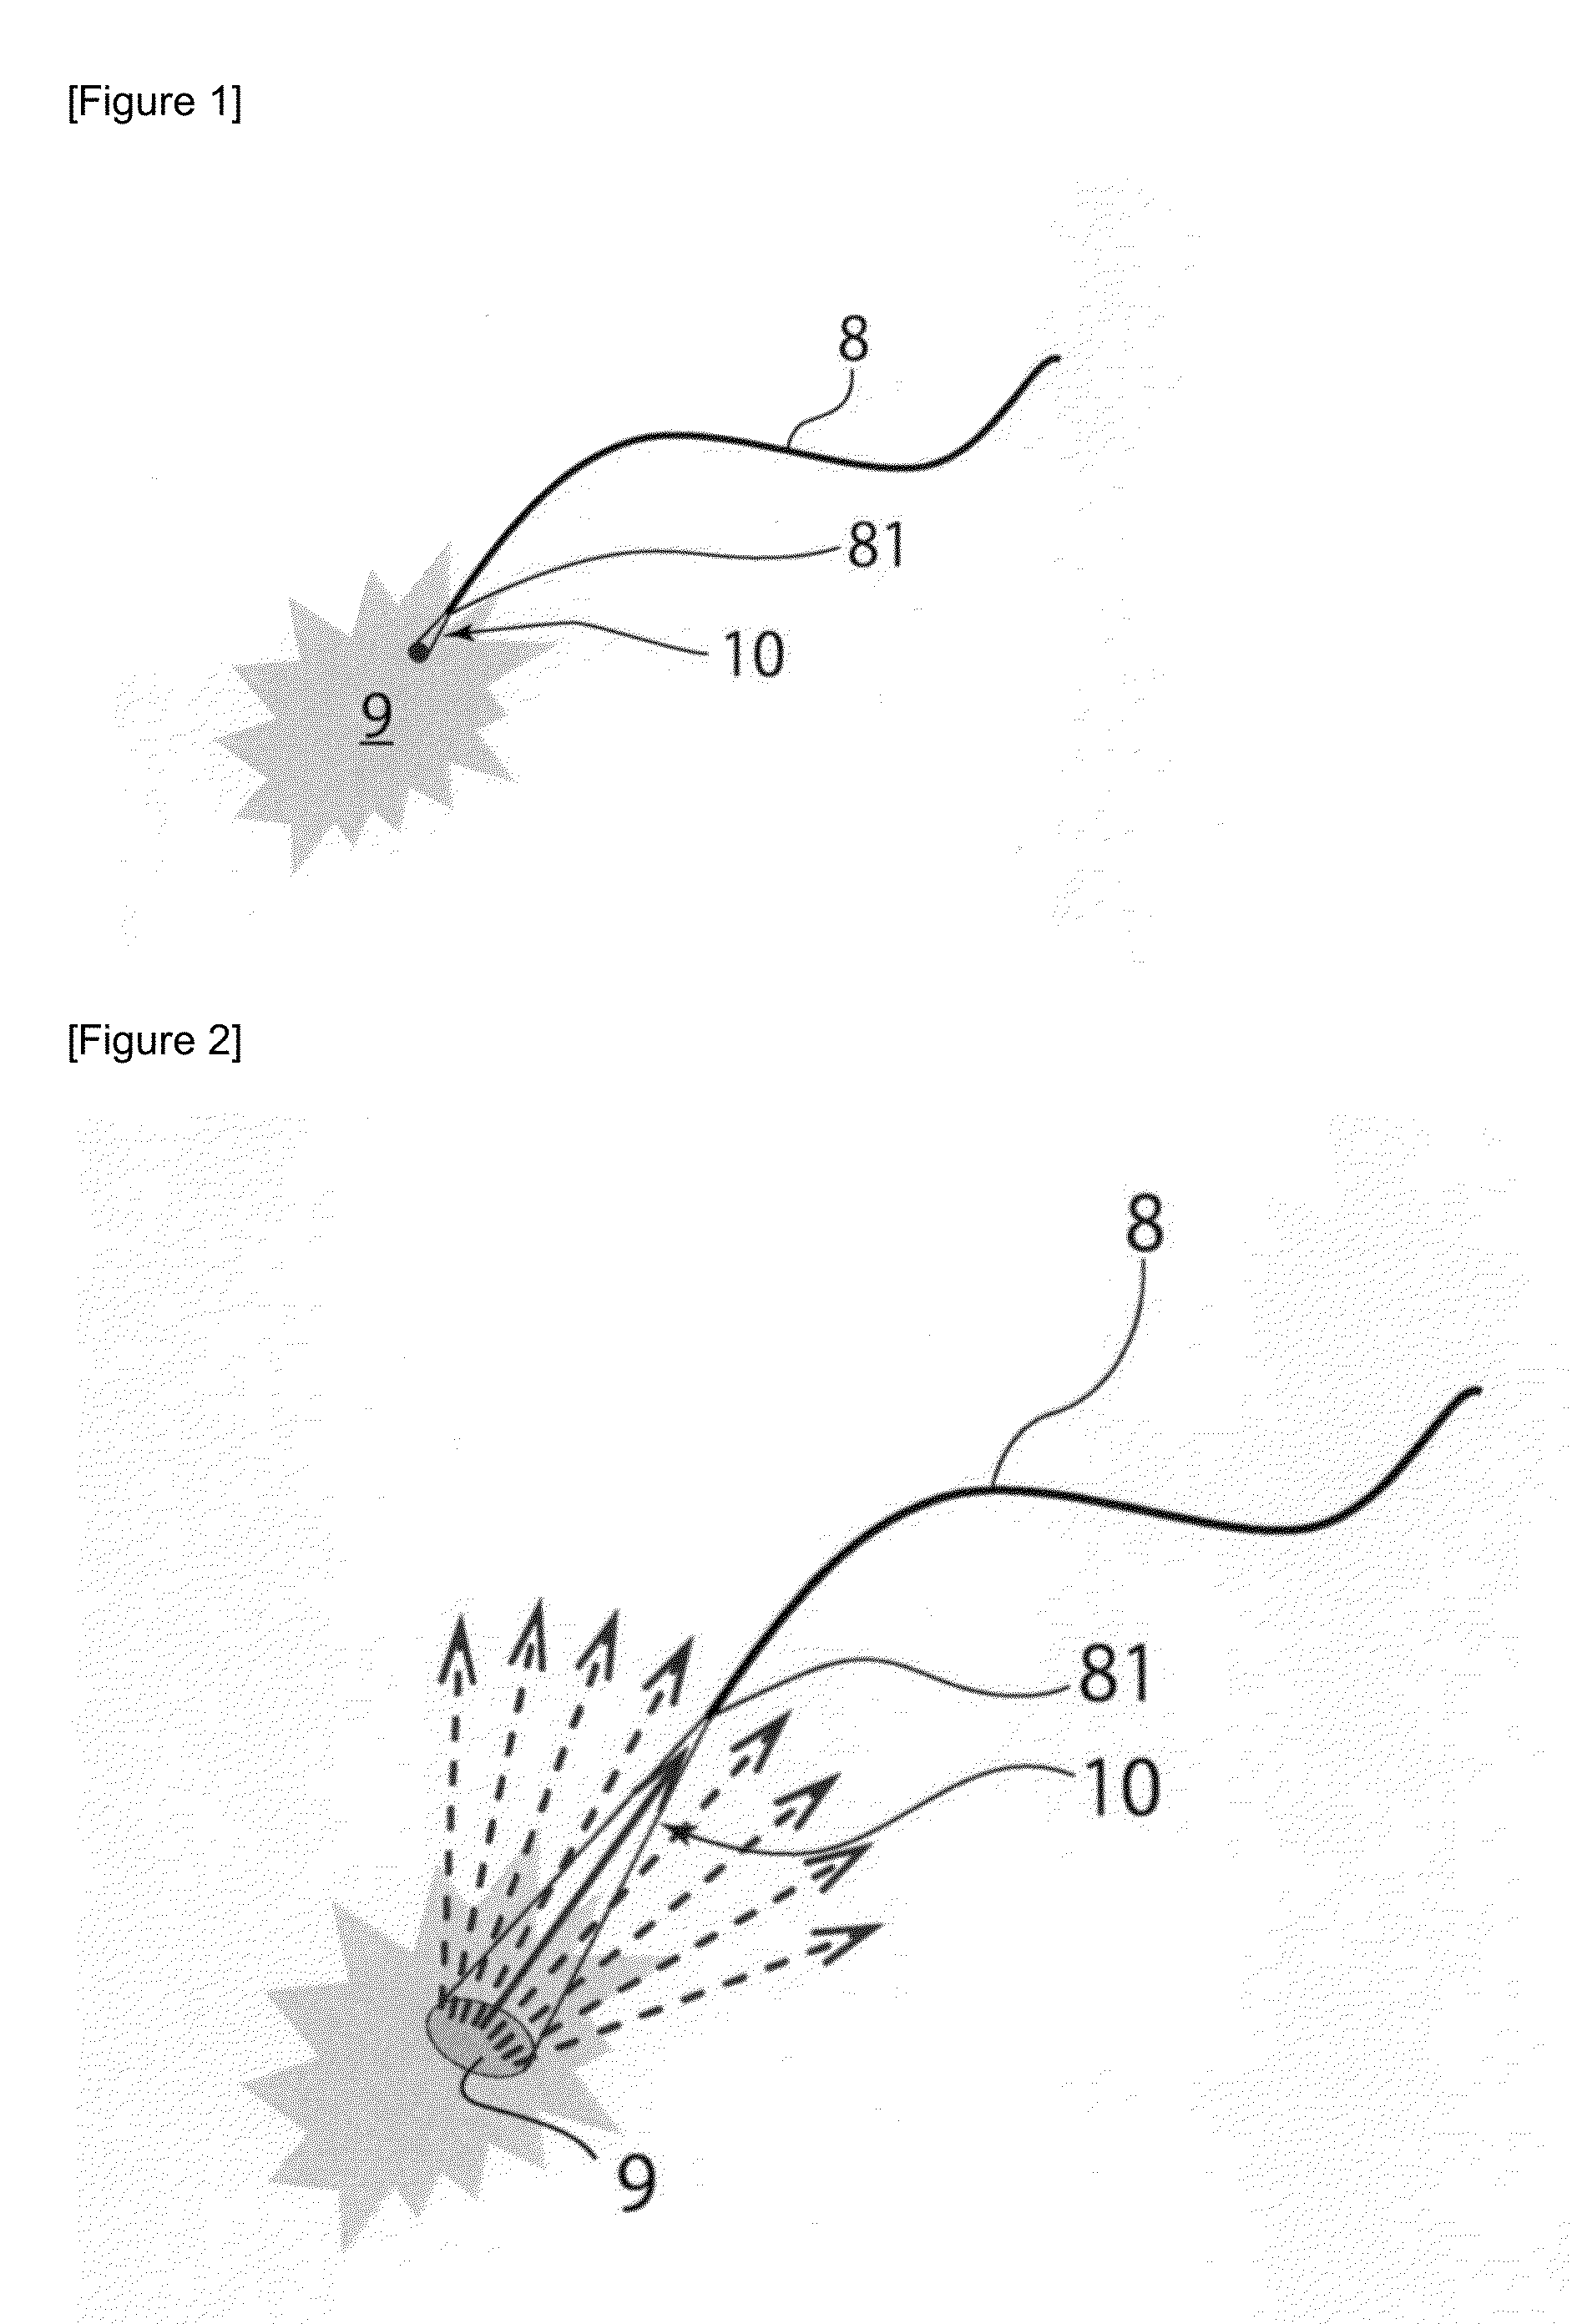 Photodynamic diagnosis apparatus provided with collimator